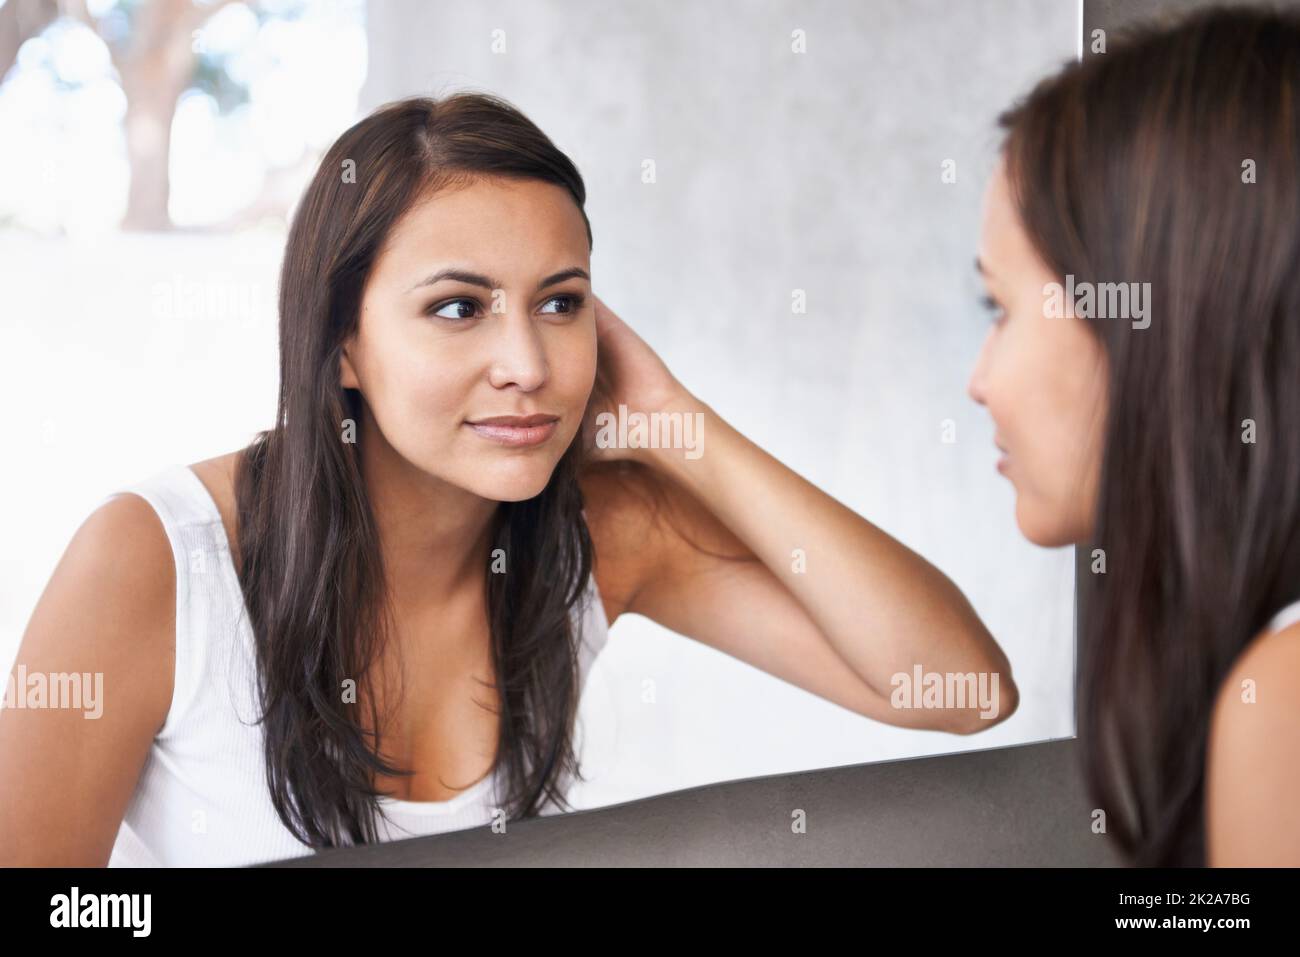 Getting excited for her date. A cropped shot of a beautiful young woman deciding on a hair style in front of her bathroom mirror. Stock Photo